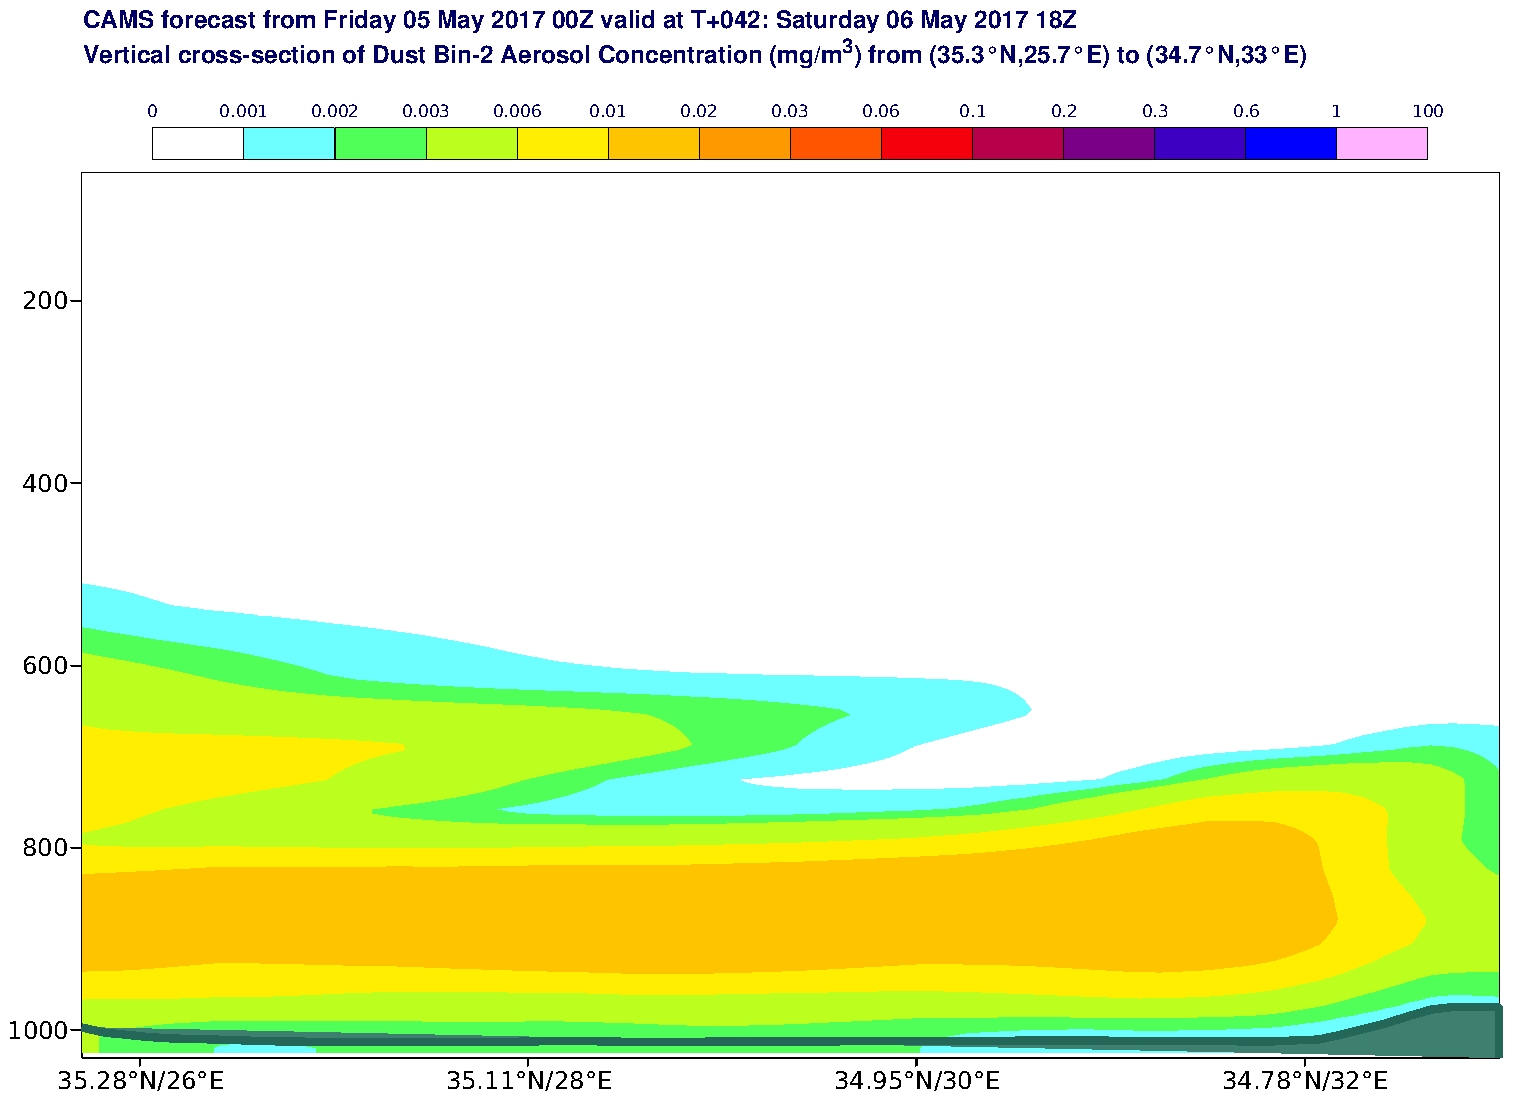 Vertical cross-section of Dust Bin-2 Aerosol Concentration (mg/m3) valid at T42 - 2017-05-06 18:00